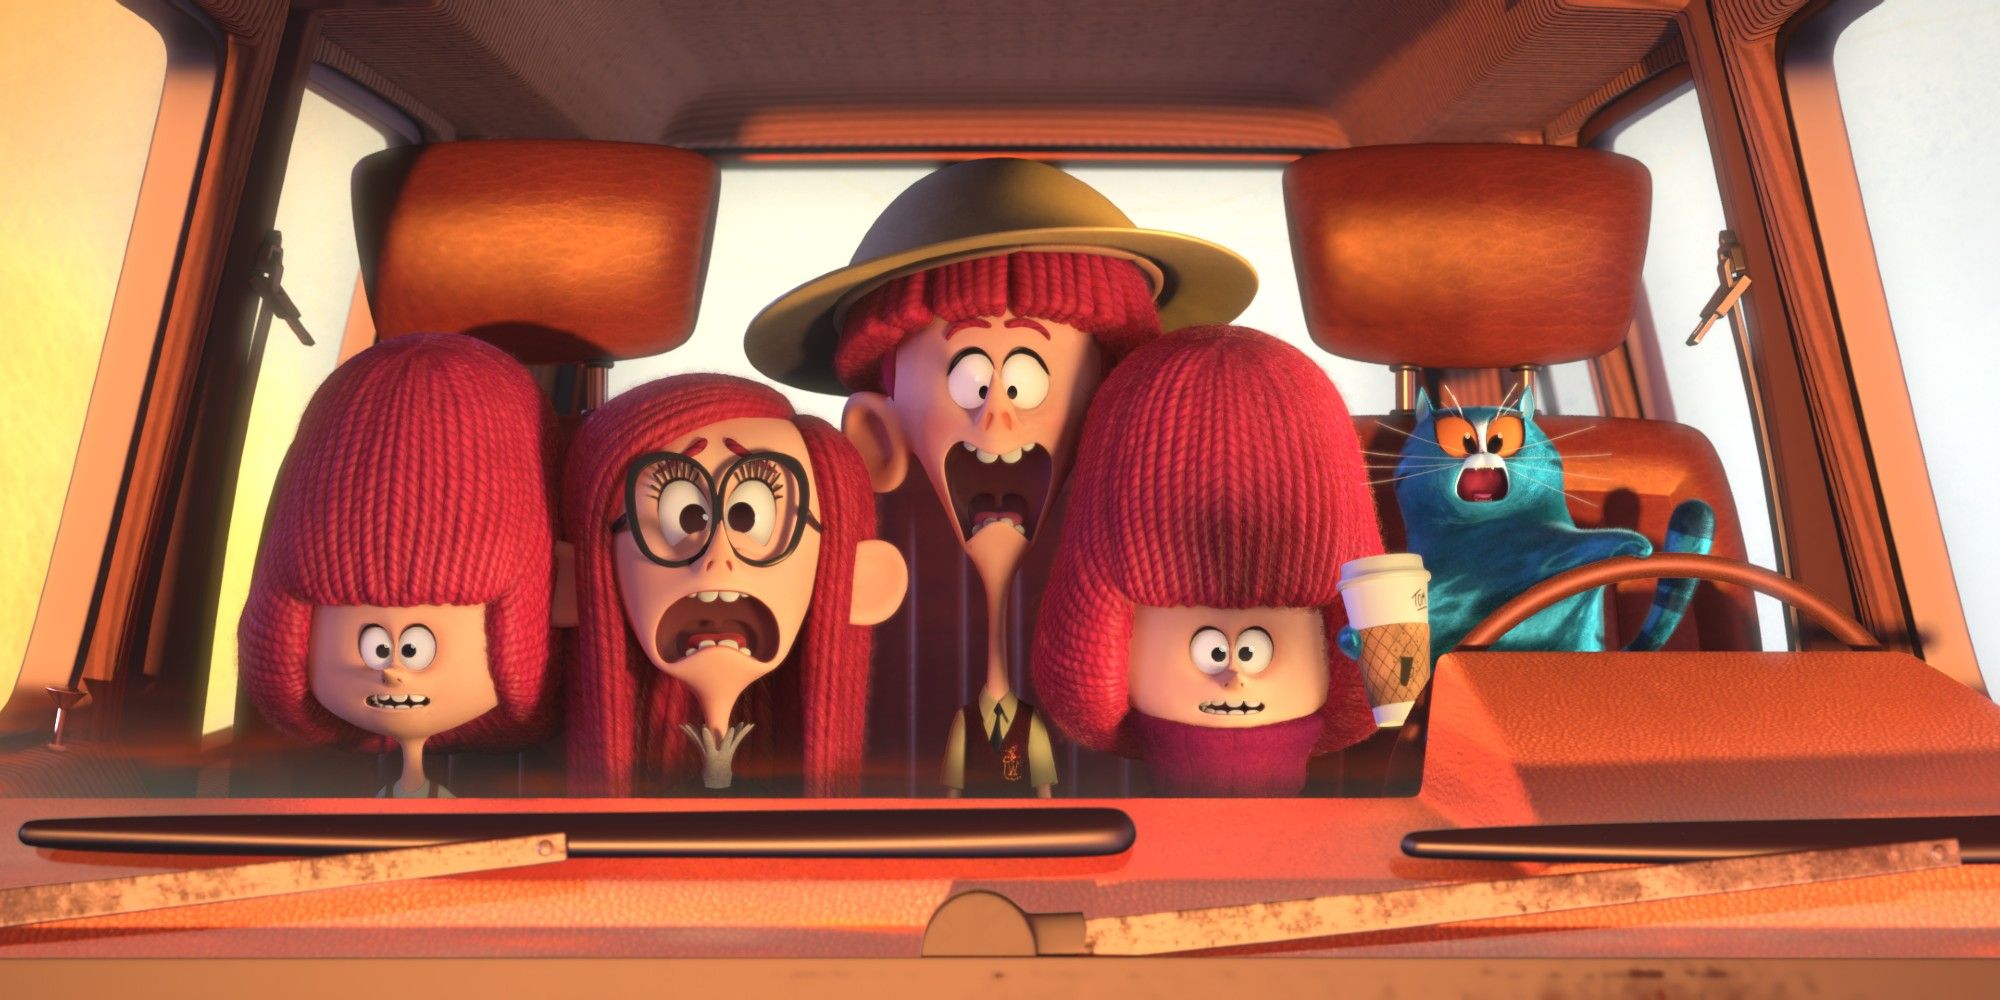 Seán Cullen, Alessia Cara, Will Forte and Ricky Gervais's characters seated in a car in a still from The Willoughbys